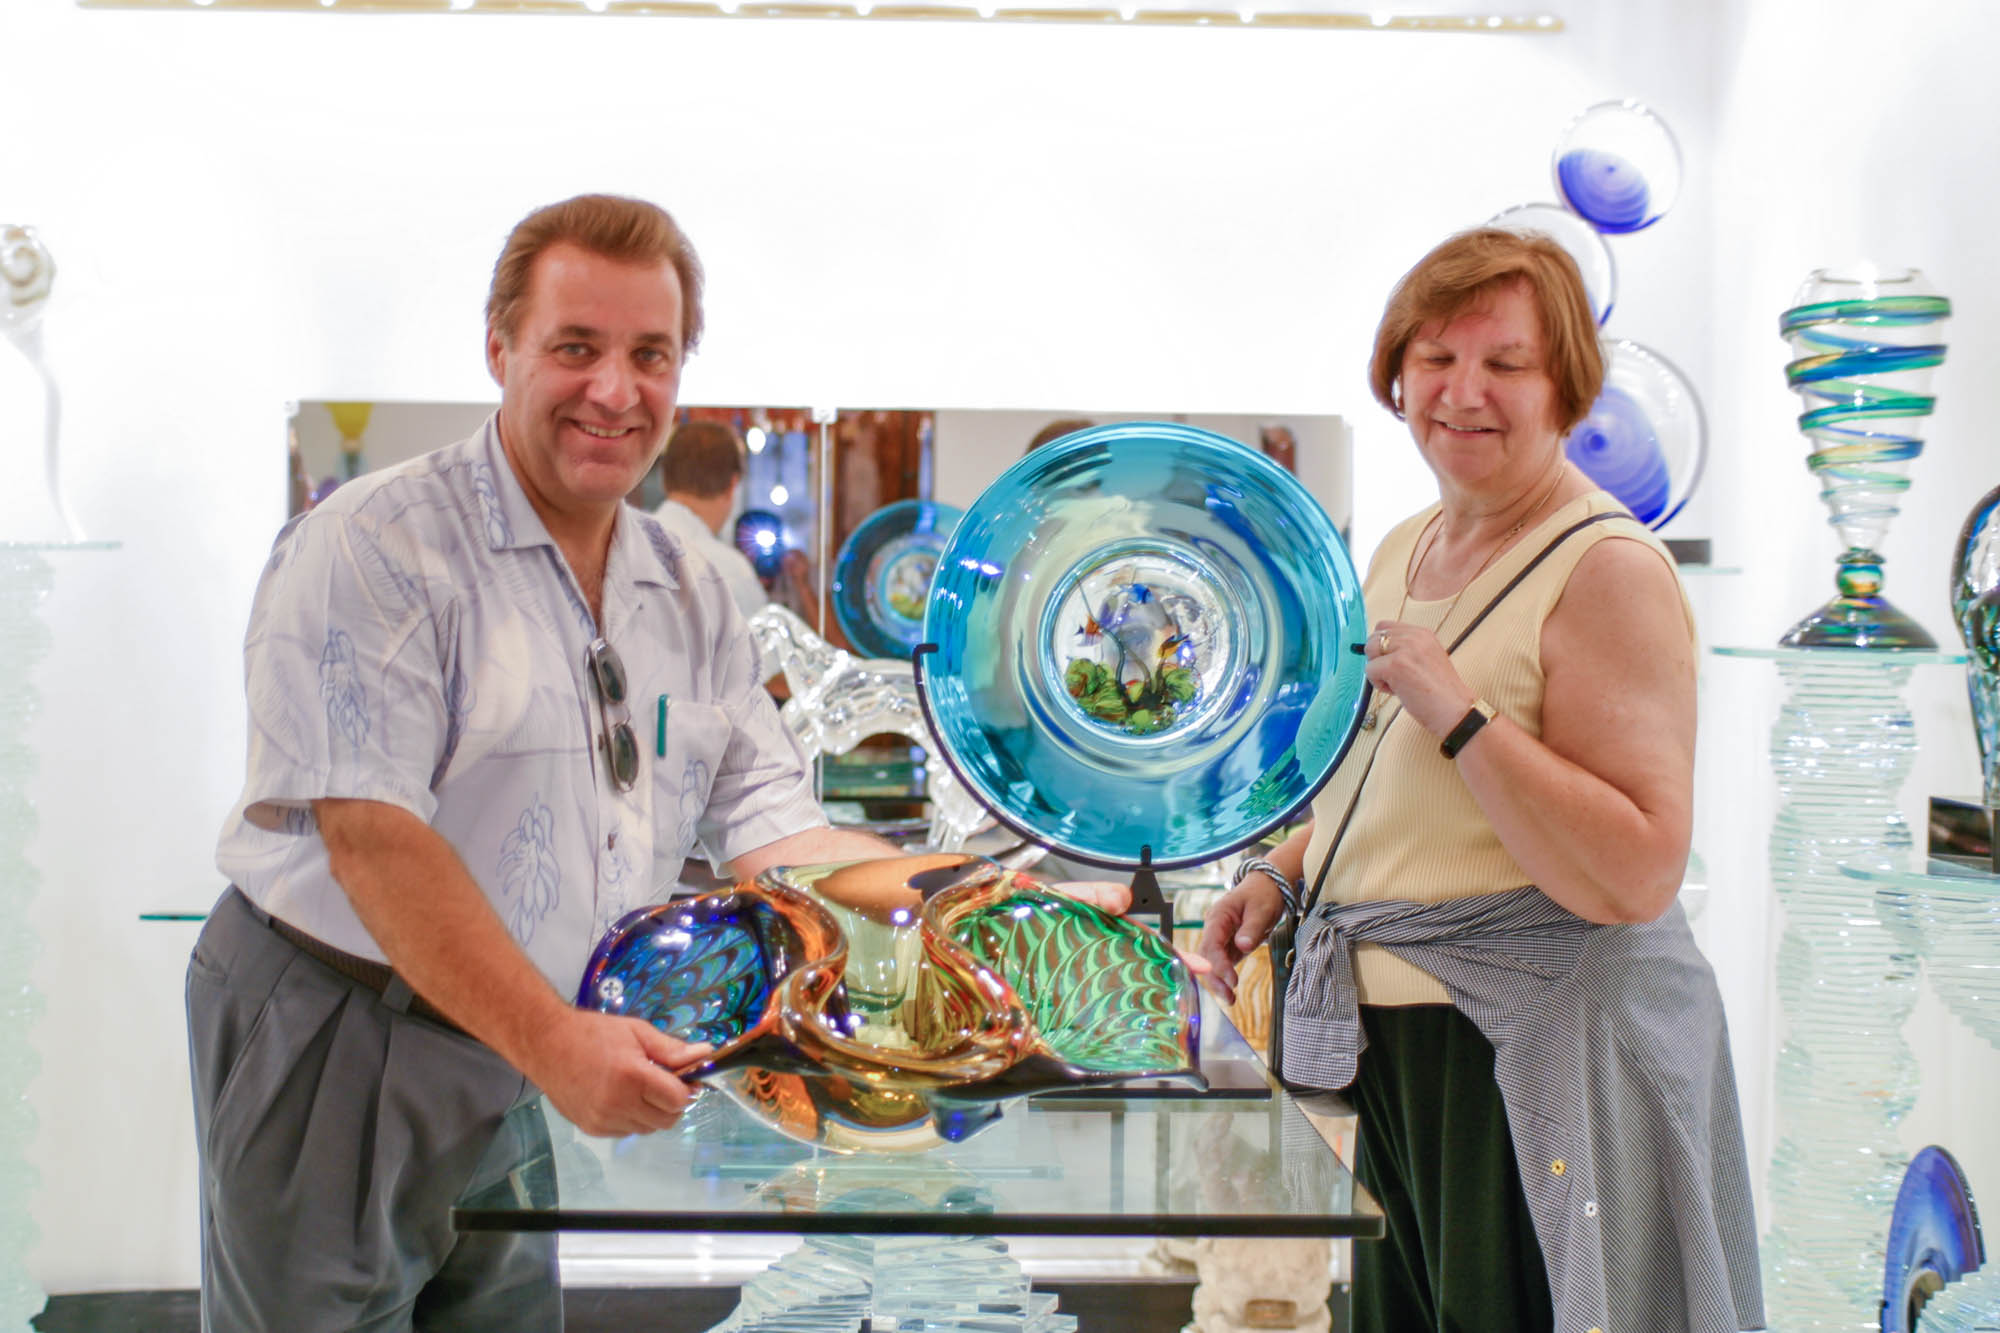 Customers checking out Murano Glass Items